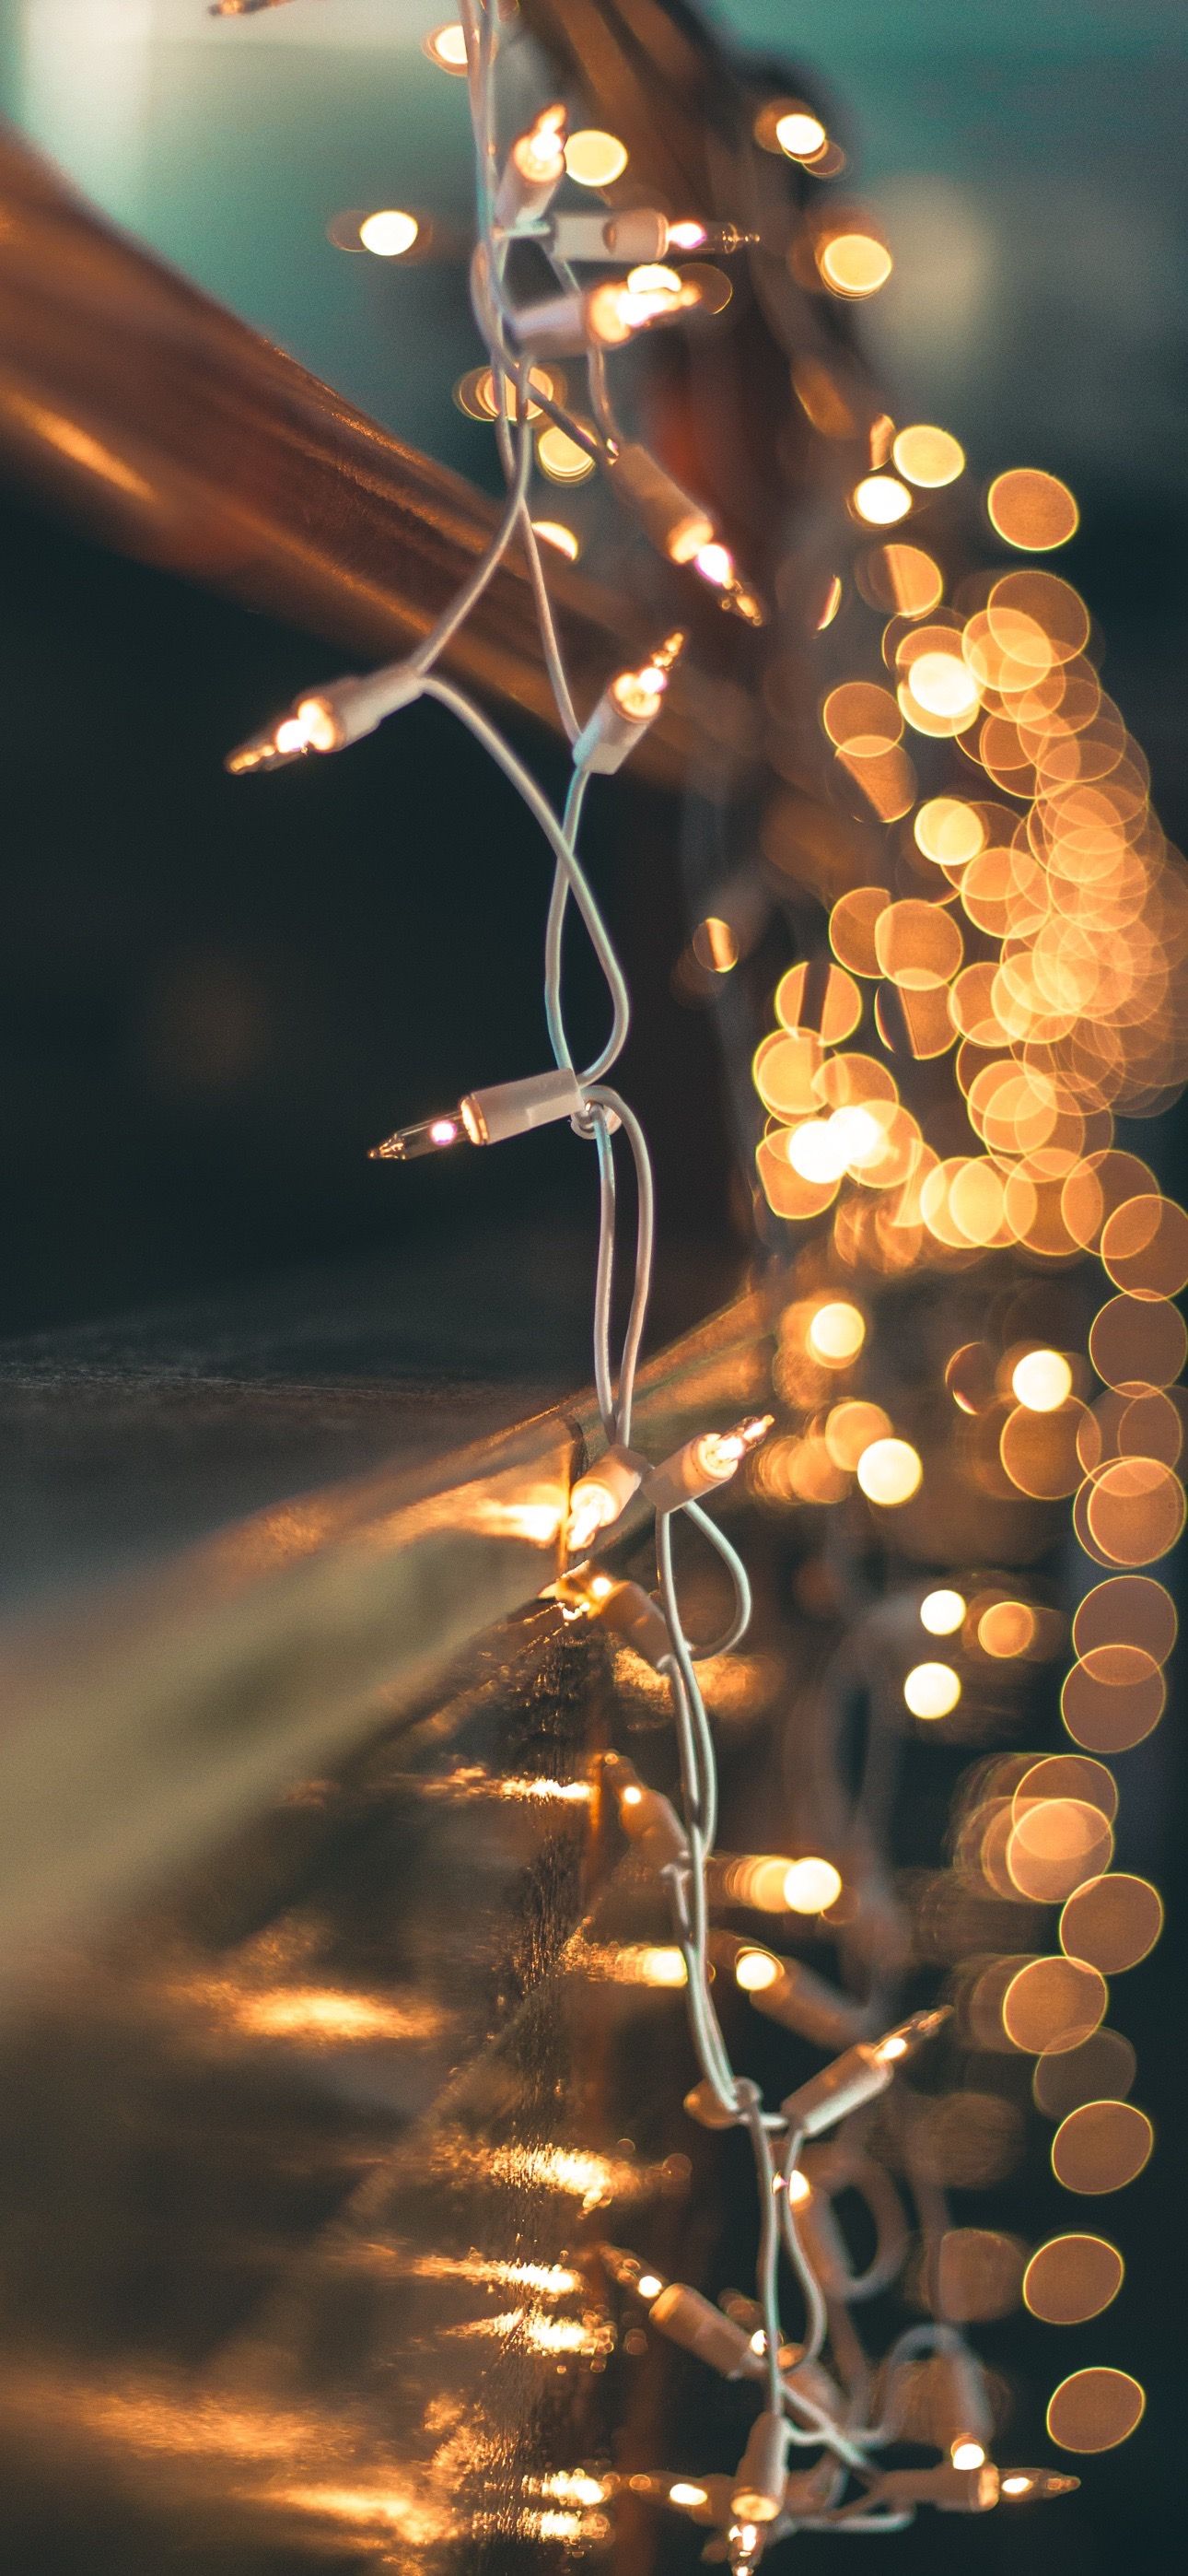 A string of lights wrapped around a wooden post. - Christmas lights, wedding